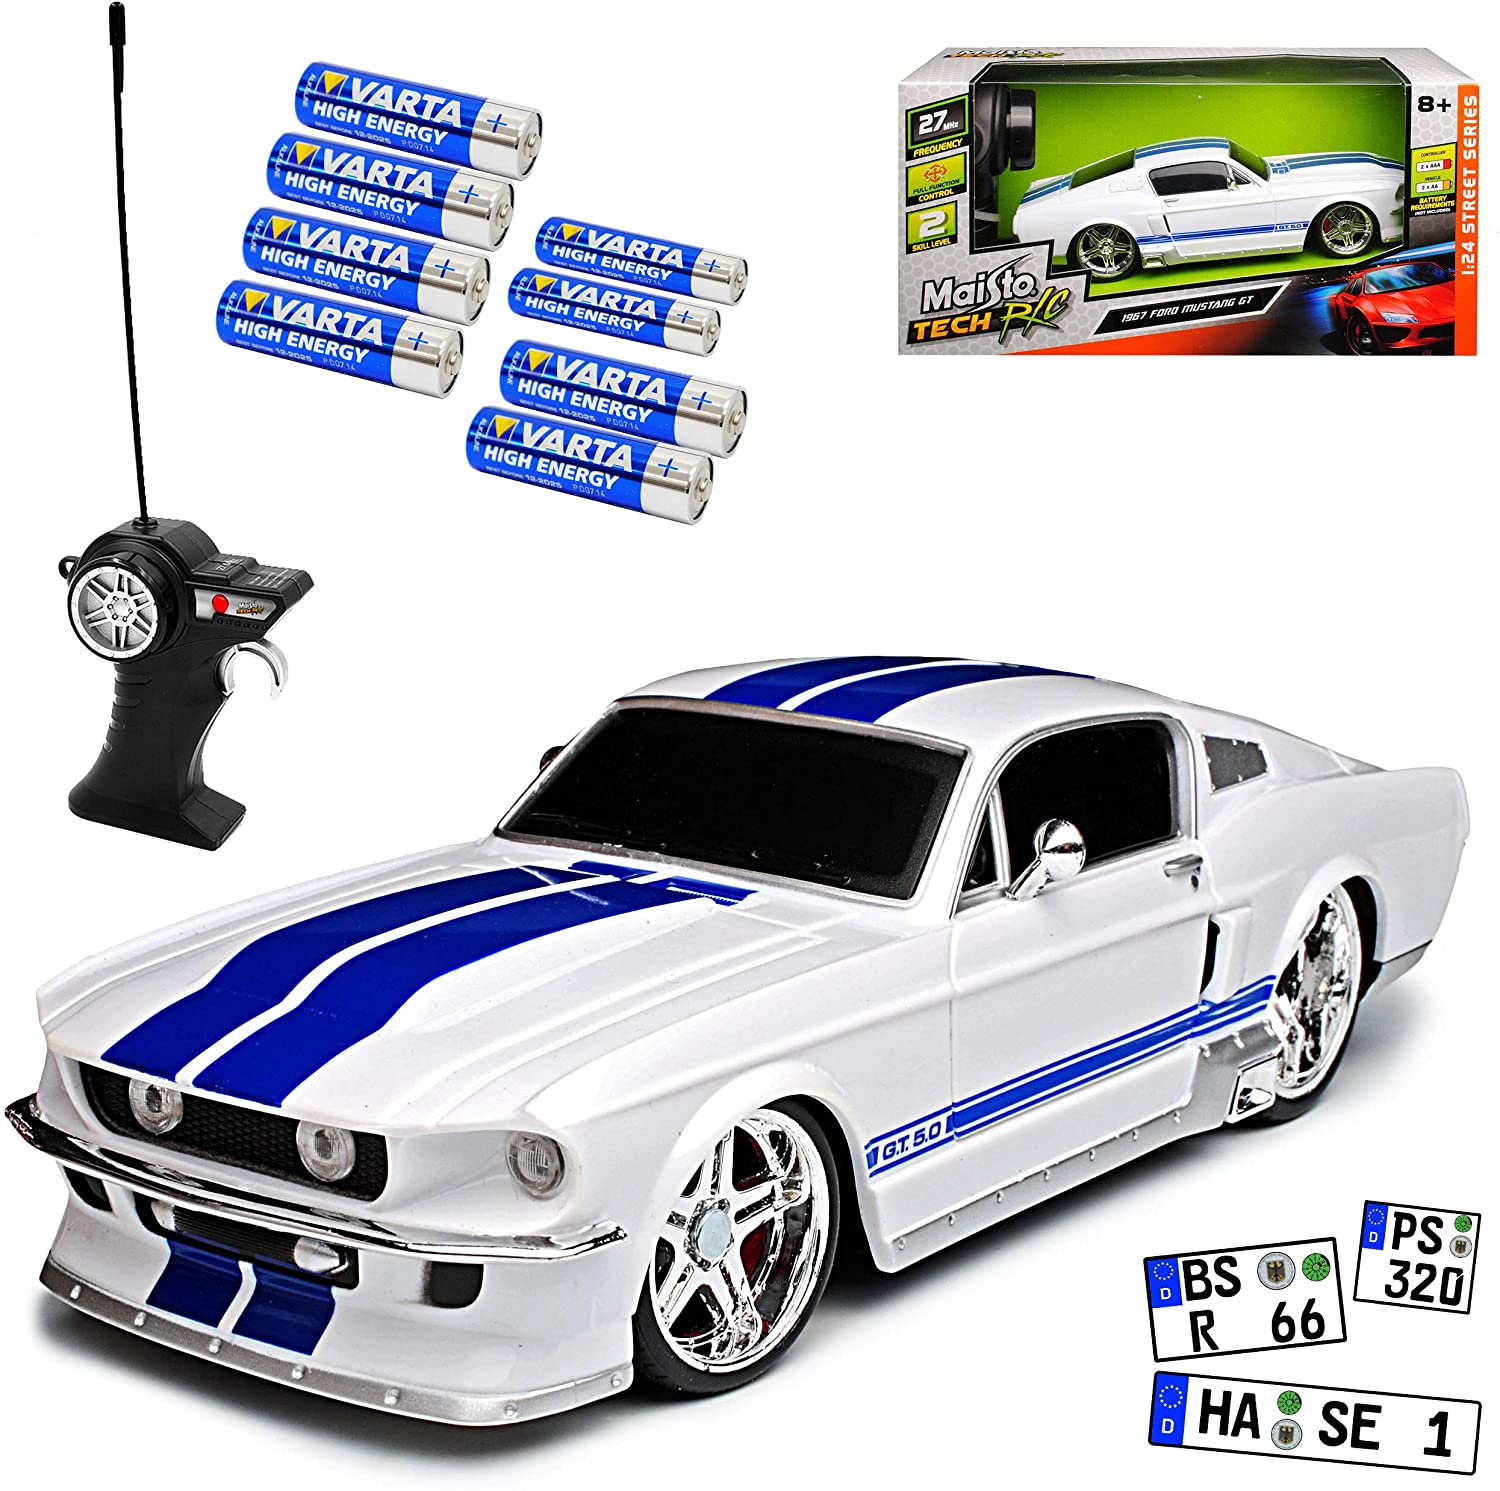 Maisto Ford Shelby Mustang Gt 1967 White With Stripes 27 Mhz Rc Radio Car -